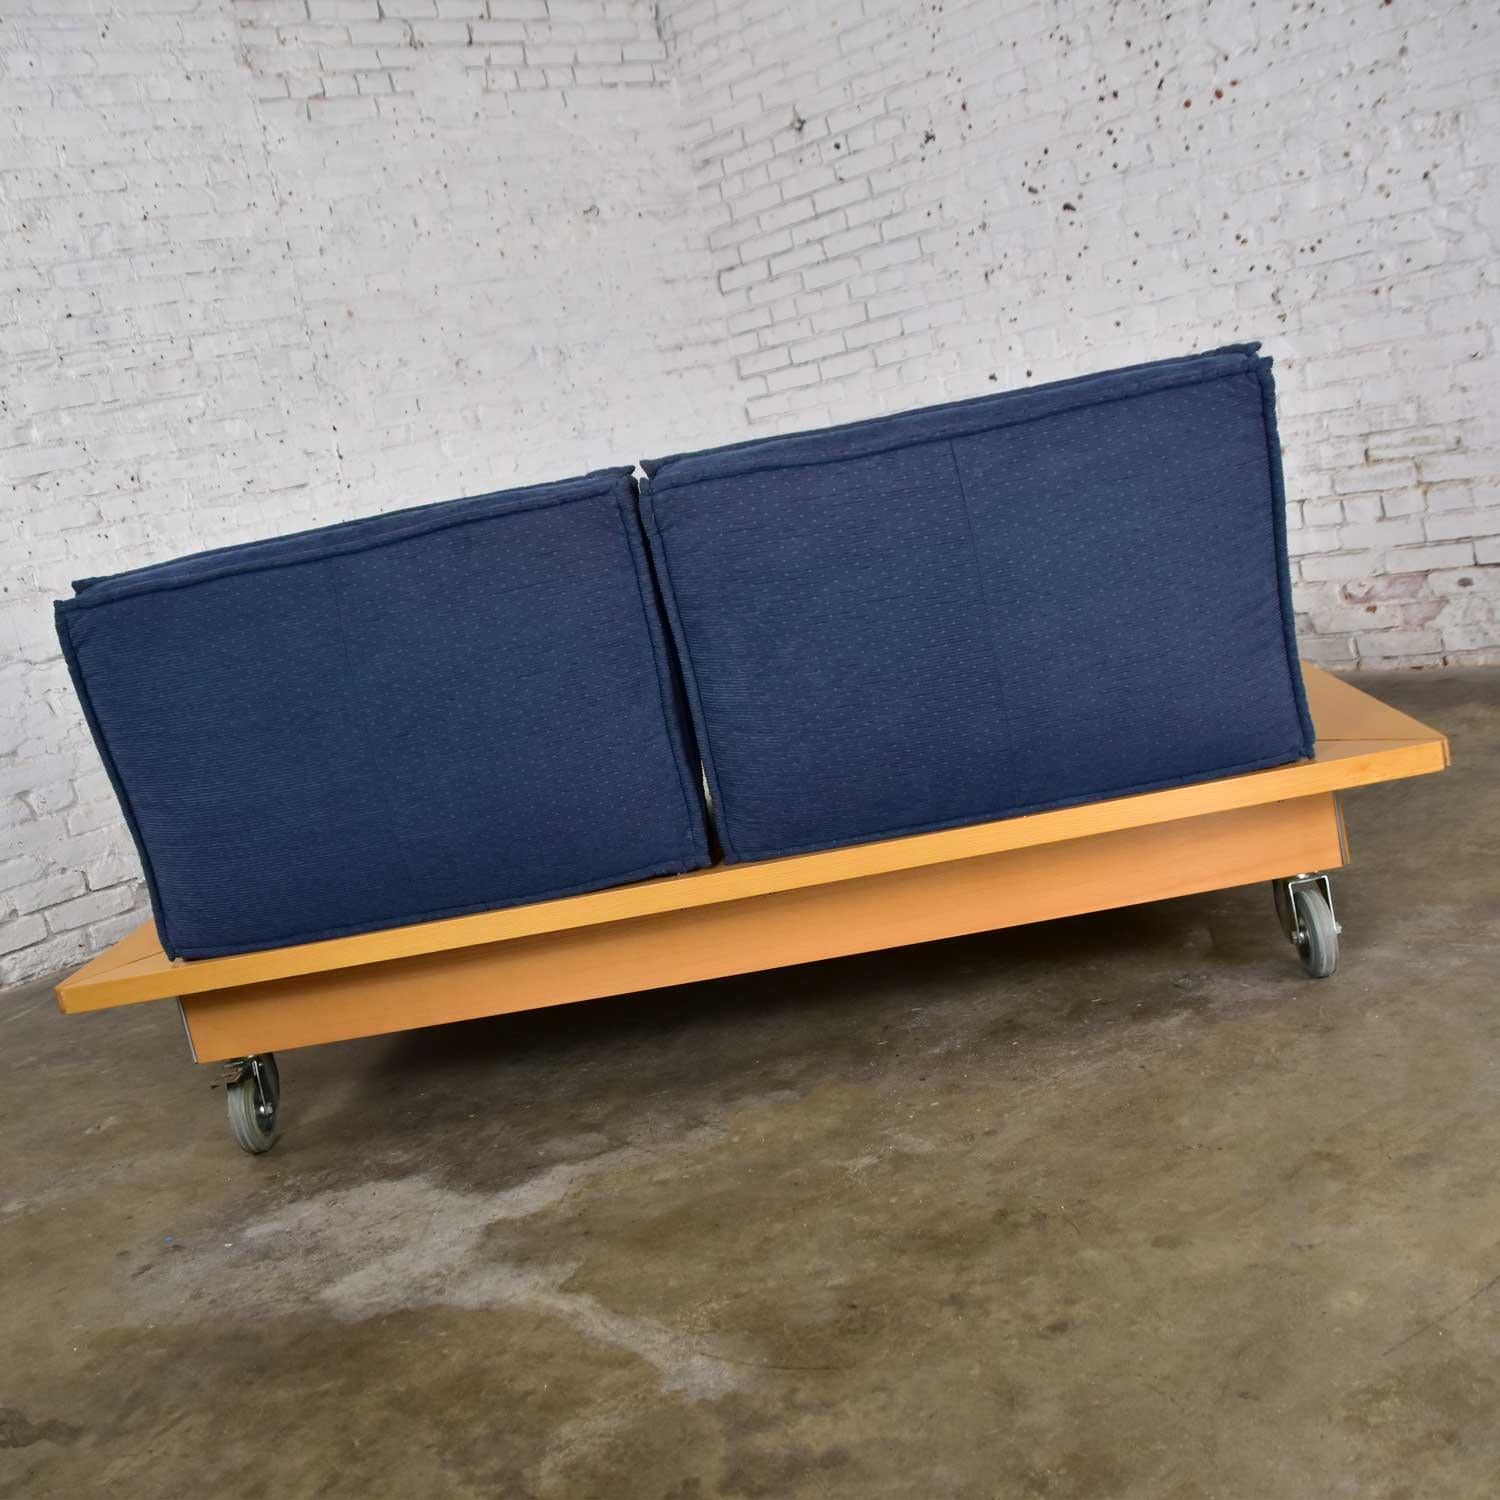 Post-Modern Ligne Roset Parallele Postmodern Platform Bed Attributed to Peter Maly